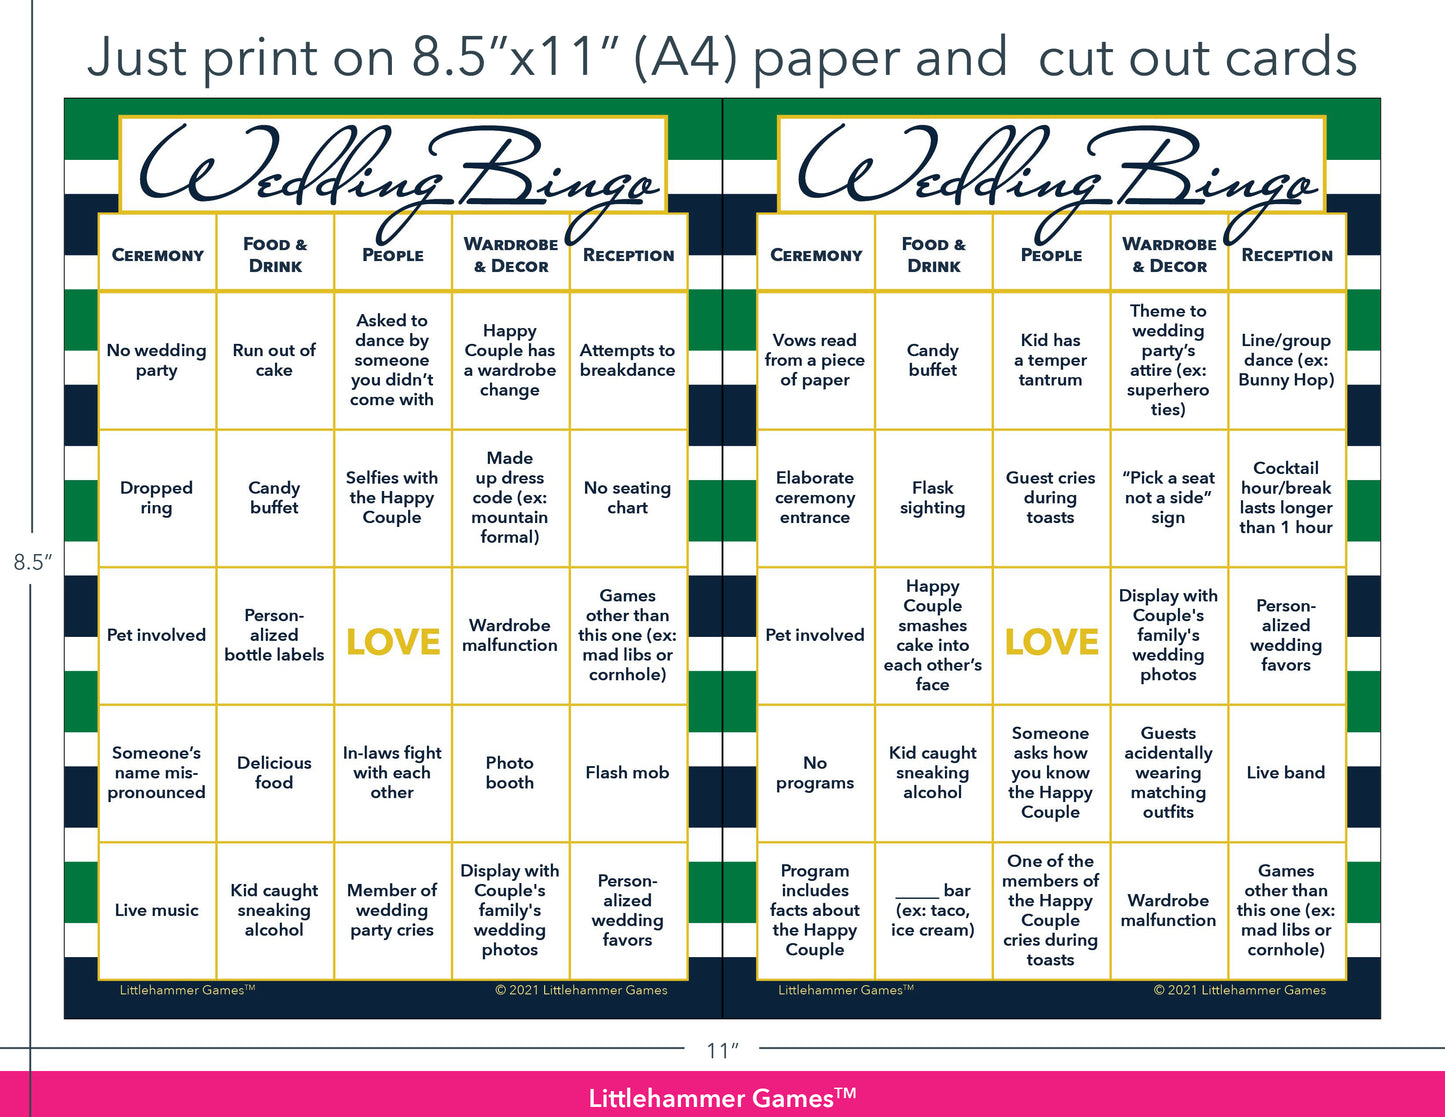 Green and navy-striped Wedding Bingo game cards with printing instructions